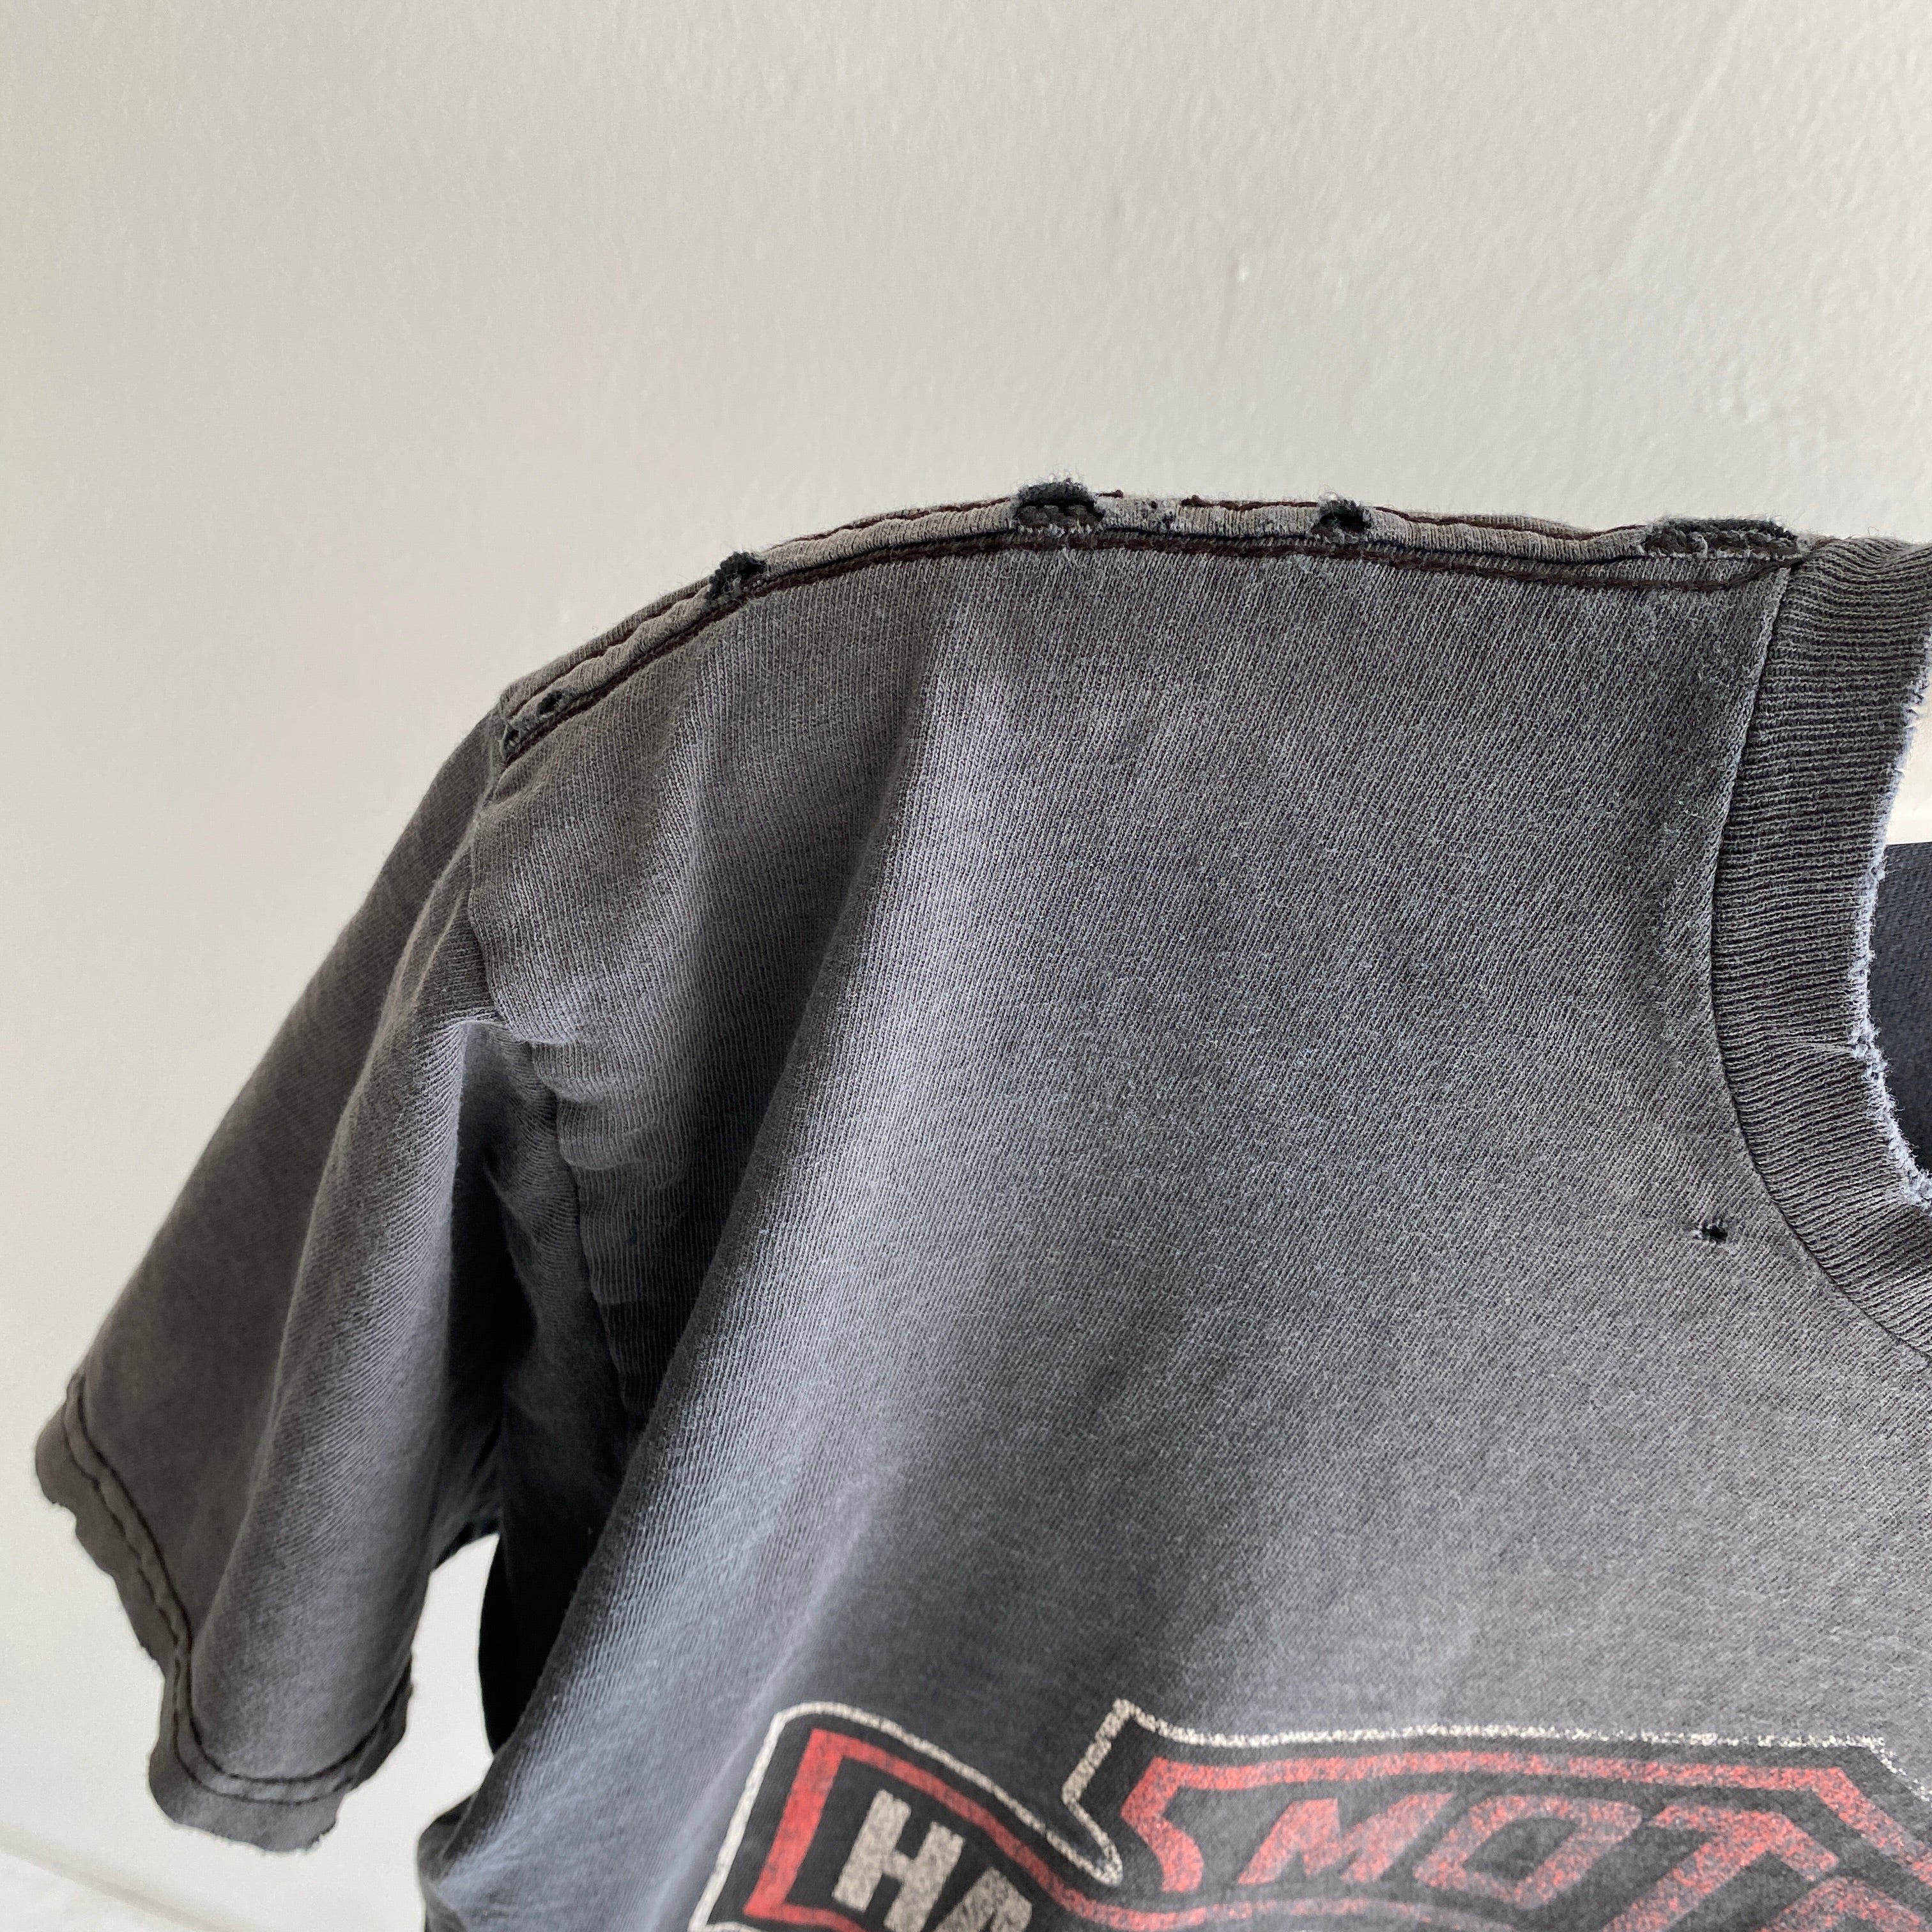 2000s Tattered, Torn, Faded, Worn - All The Things - Harley T-Shirt